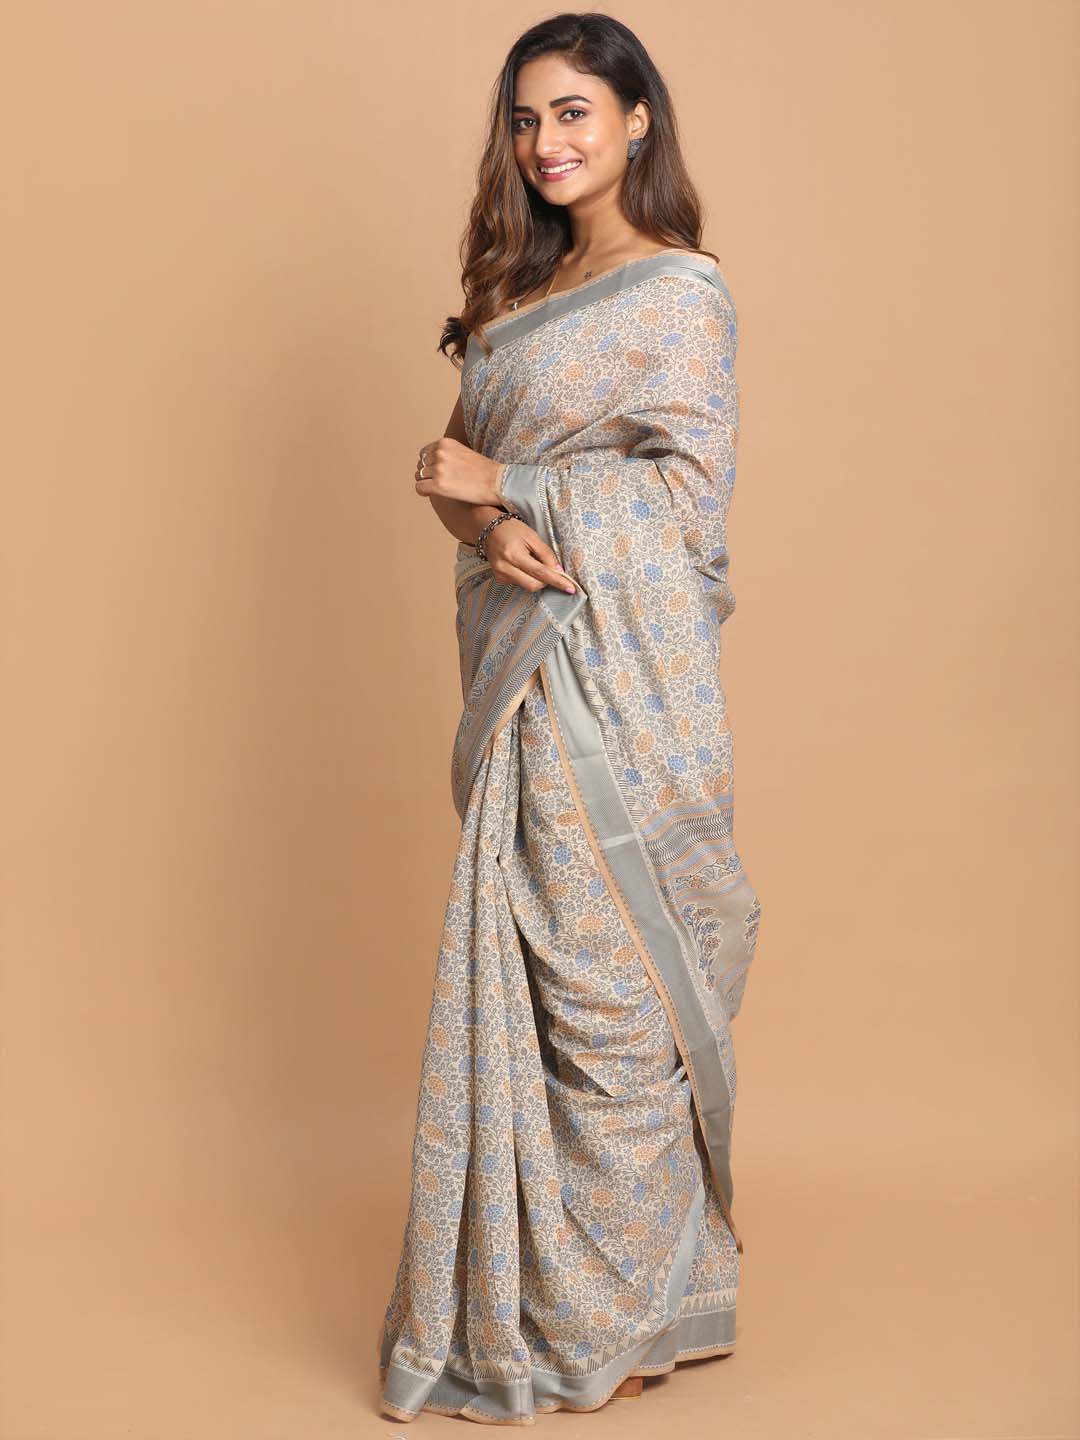 Indethnic Printed Cotton Blend Saree in Grey - View 2